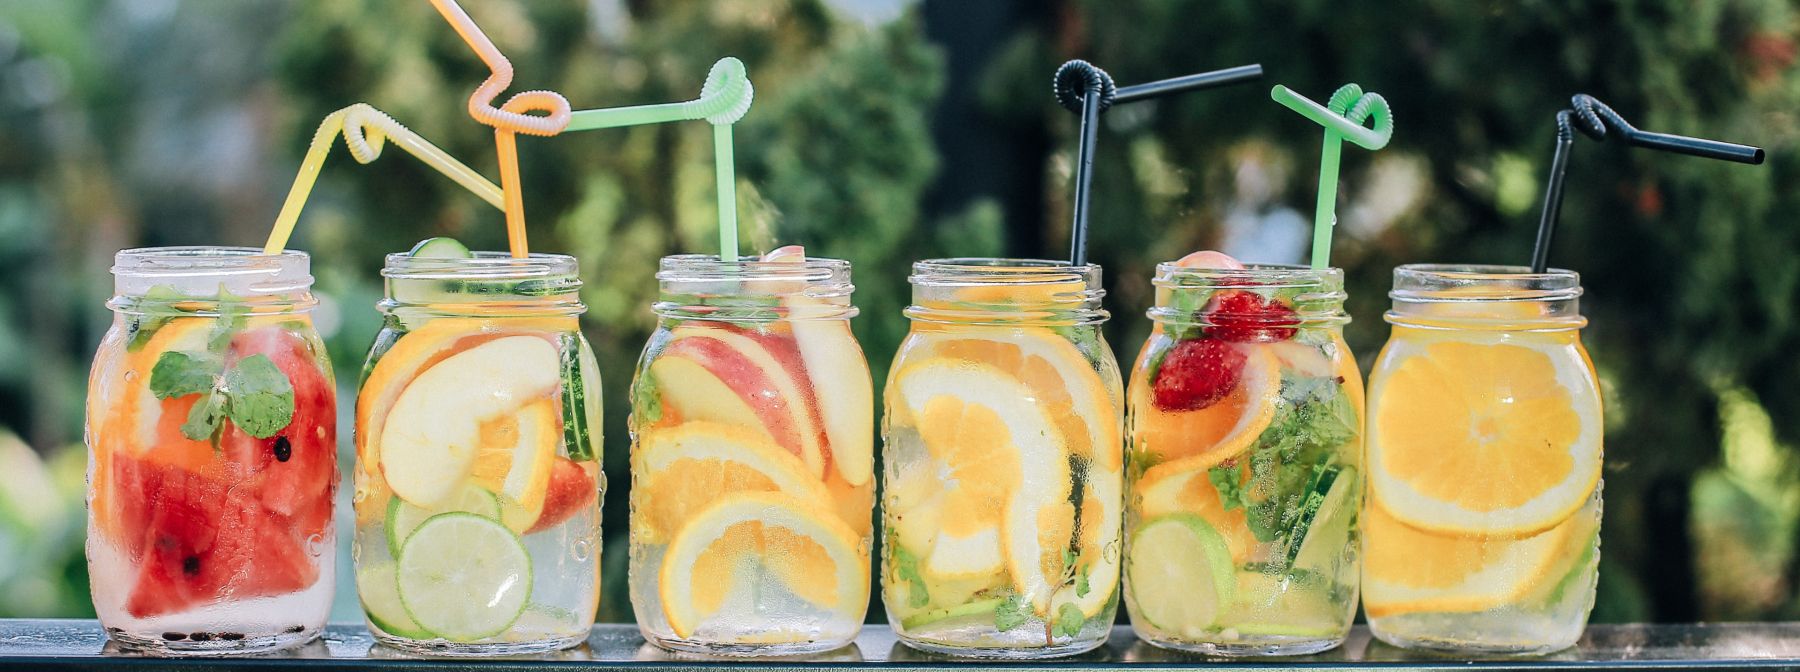 Why You Don’t Need To Detox According To A Nutritionist